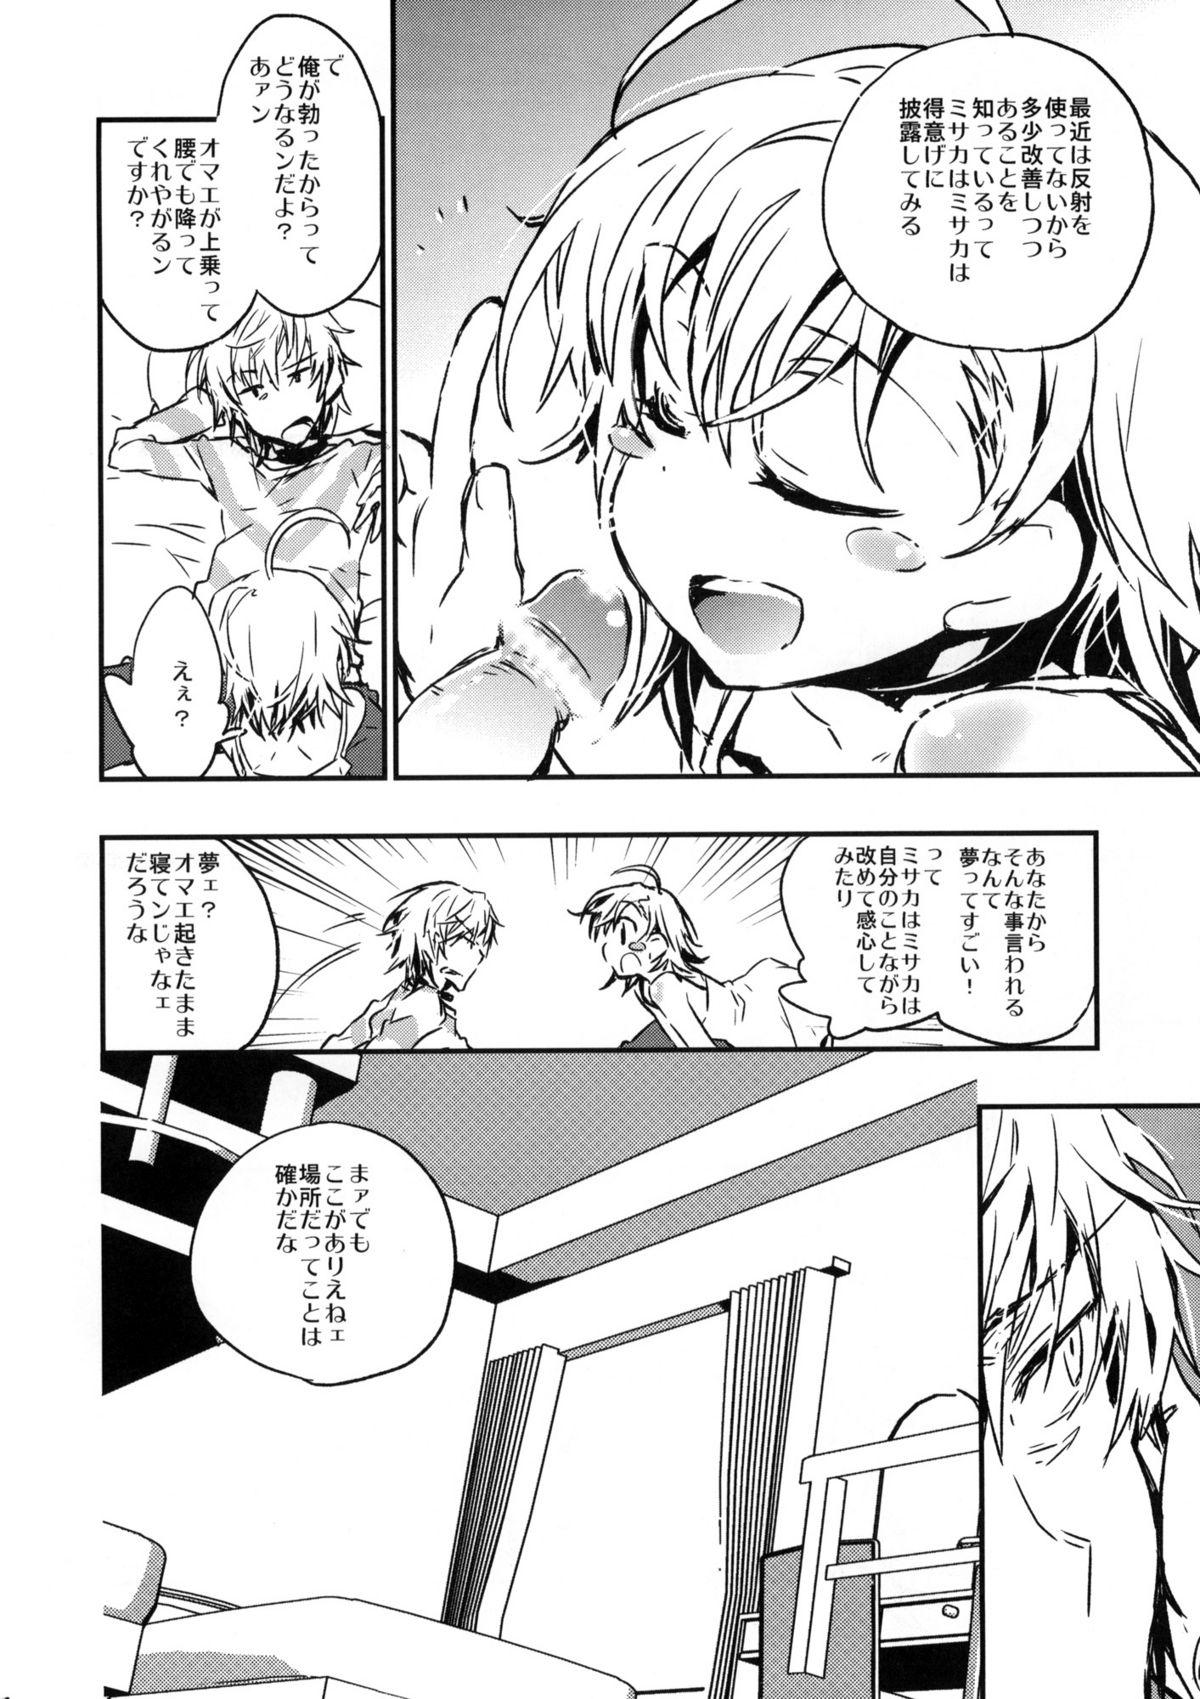 Time We're part of each other - Toaru majutsu no index Amatures Gone Wild - Page 5